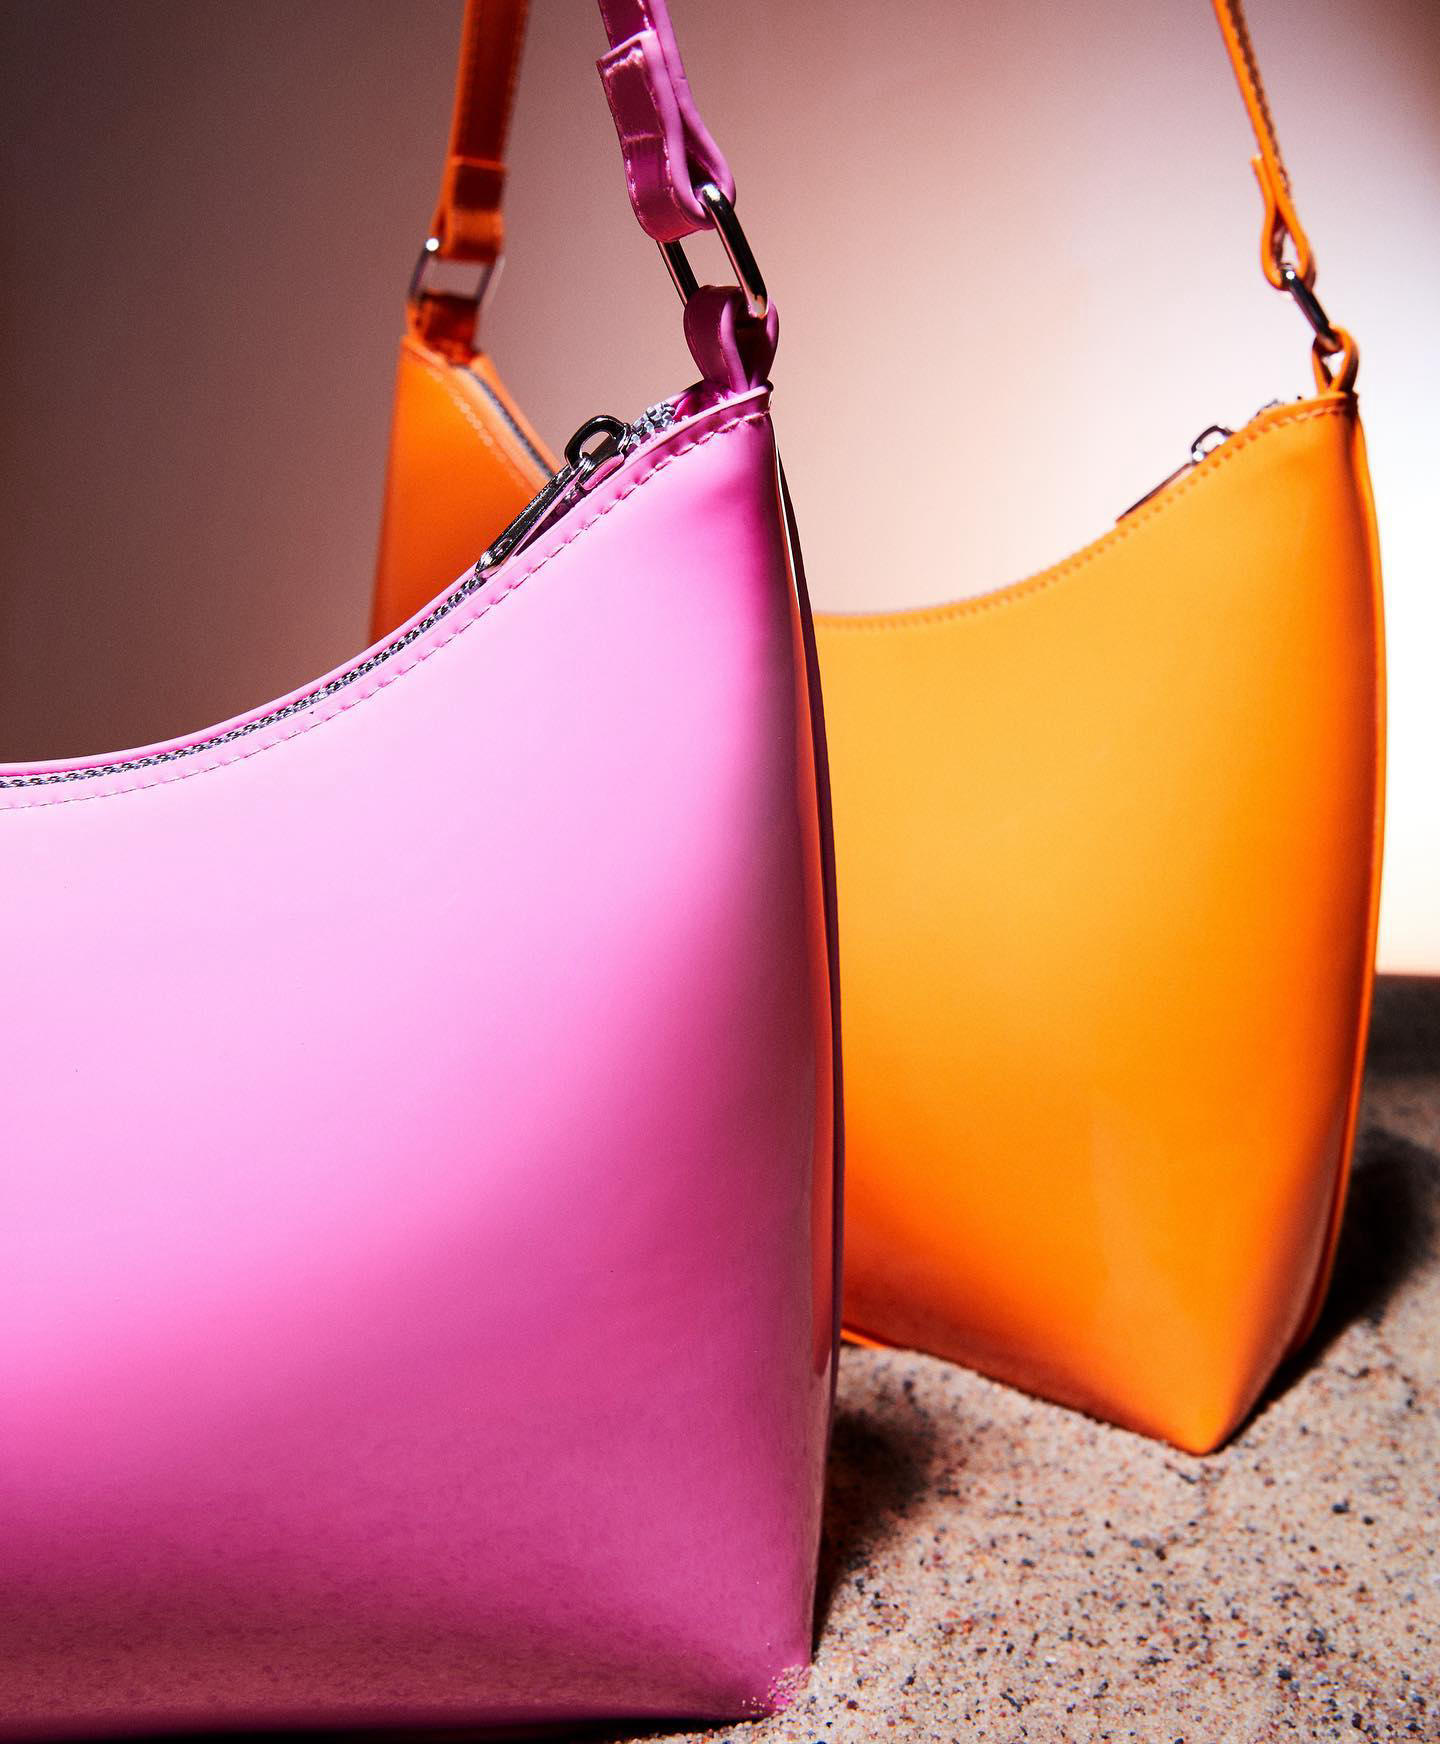 Candy-coloured accessories, coming right up